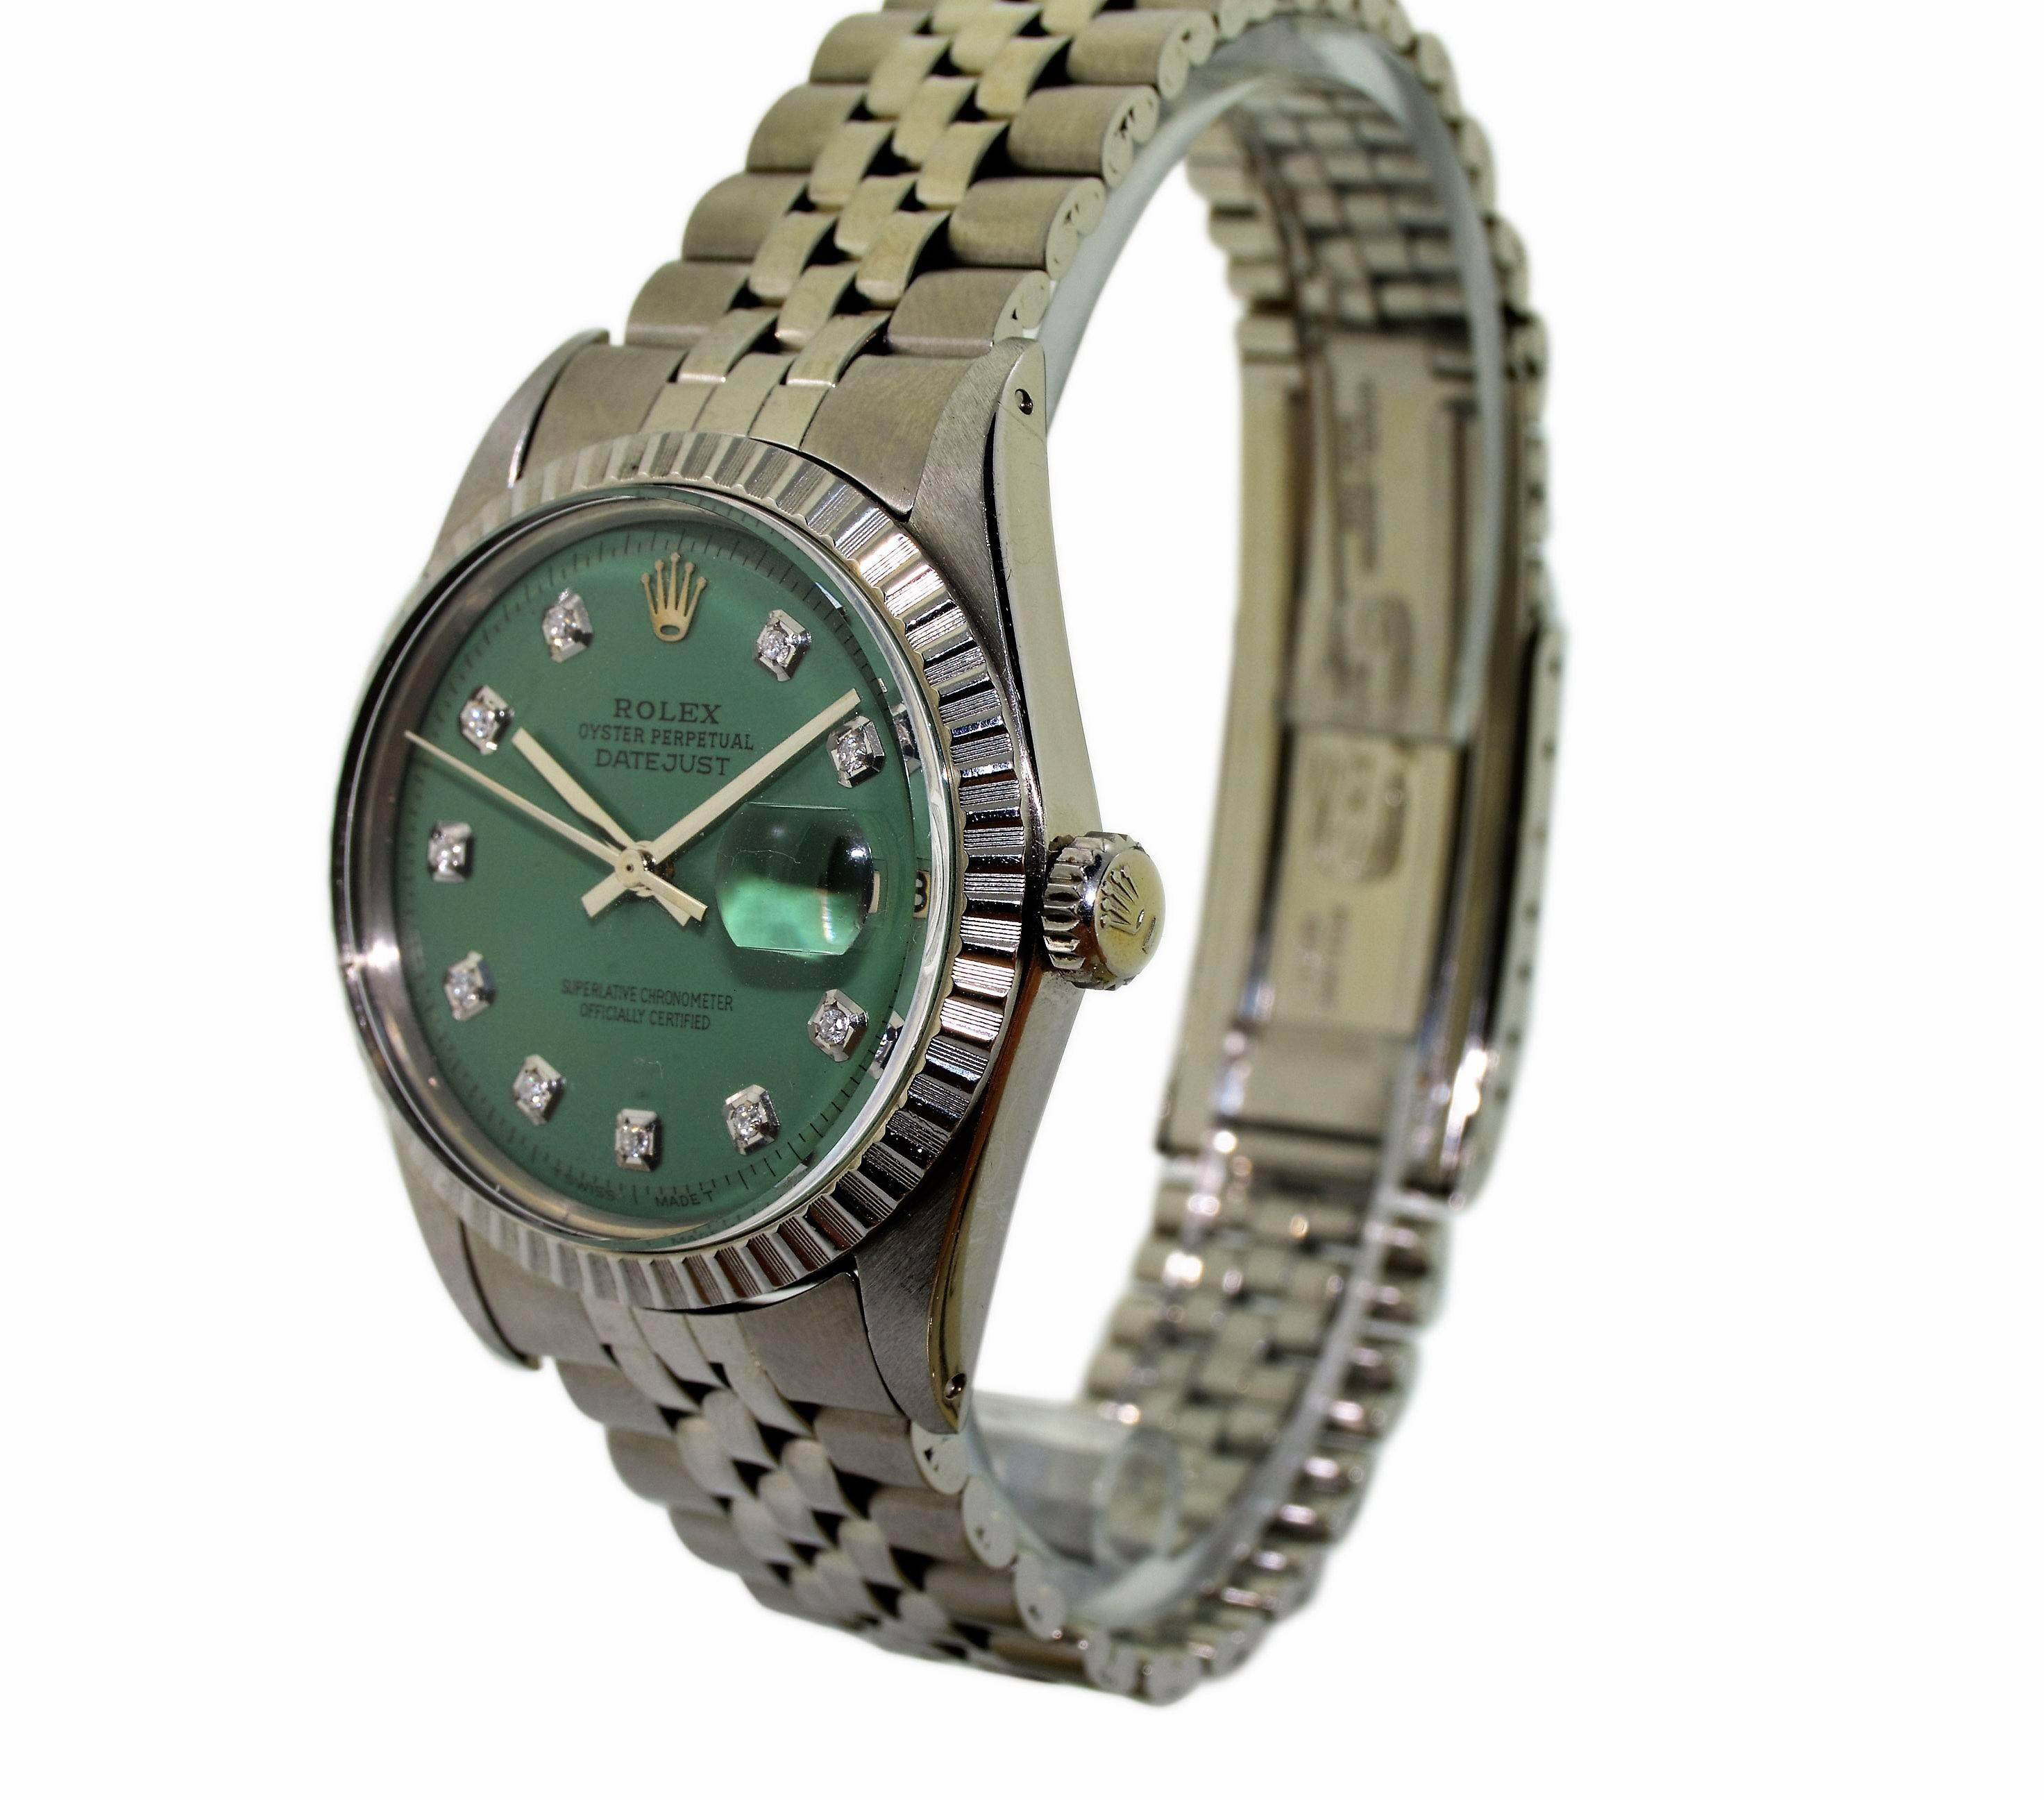 FACTORY / HOUSE: Rolex Watch  Company
STYLE / REFERENCE: Datejust / 1601
METAL: Stainless Steel 
CIRCA: 1978
MOVEMENT / CALIBER: Perpetual, Automatic / 26 Jewels 1570
DIAL / HANDS: Custom Replacement Diamond Dial / Baton Hands
DIMENSIONS: 42mm X 